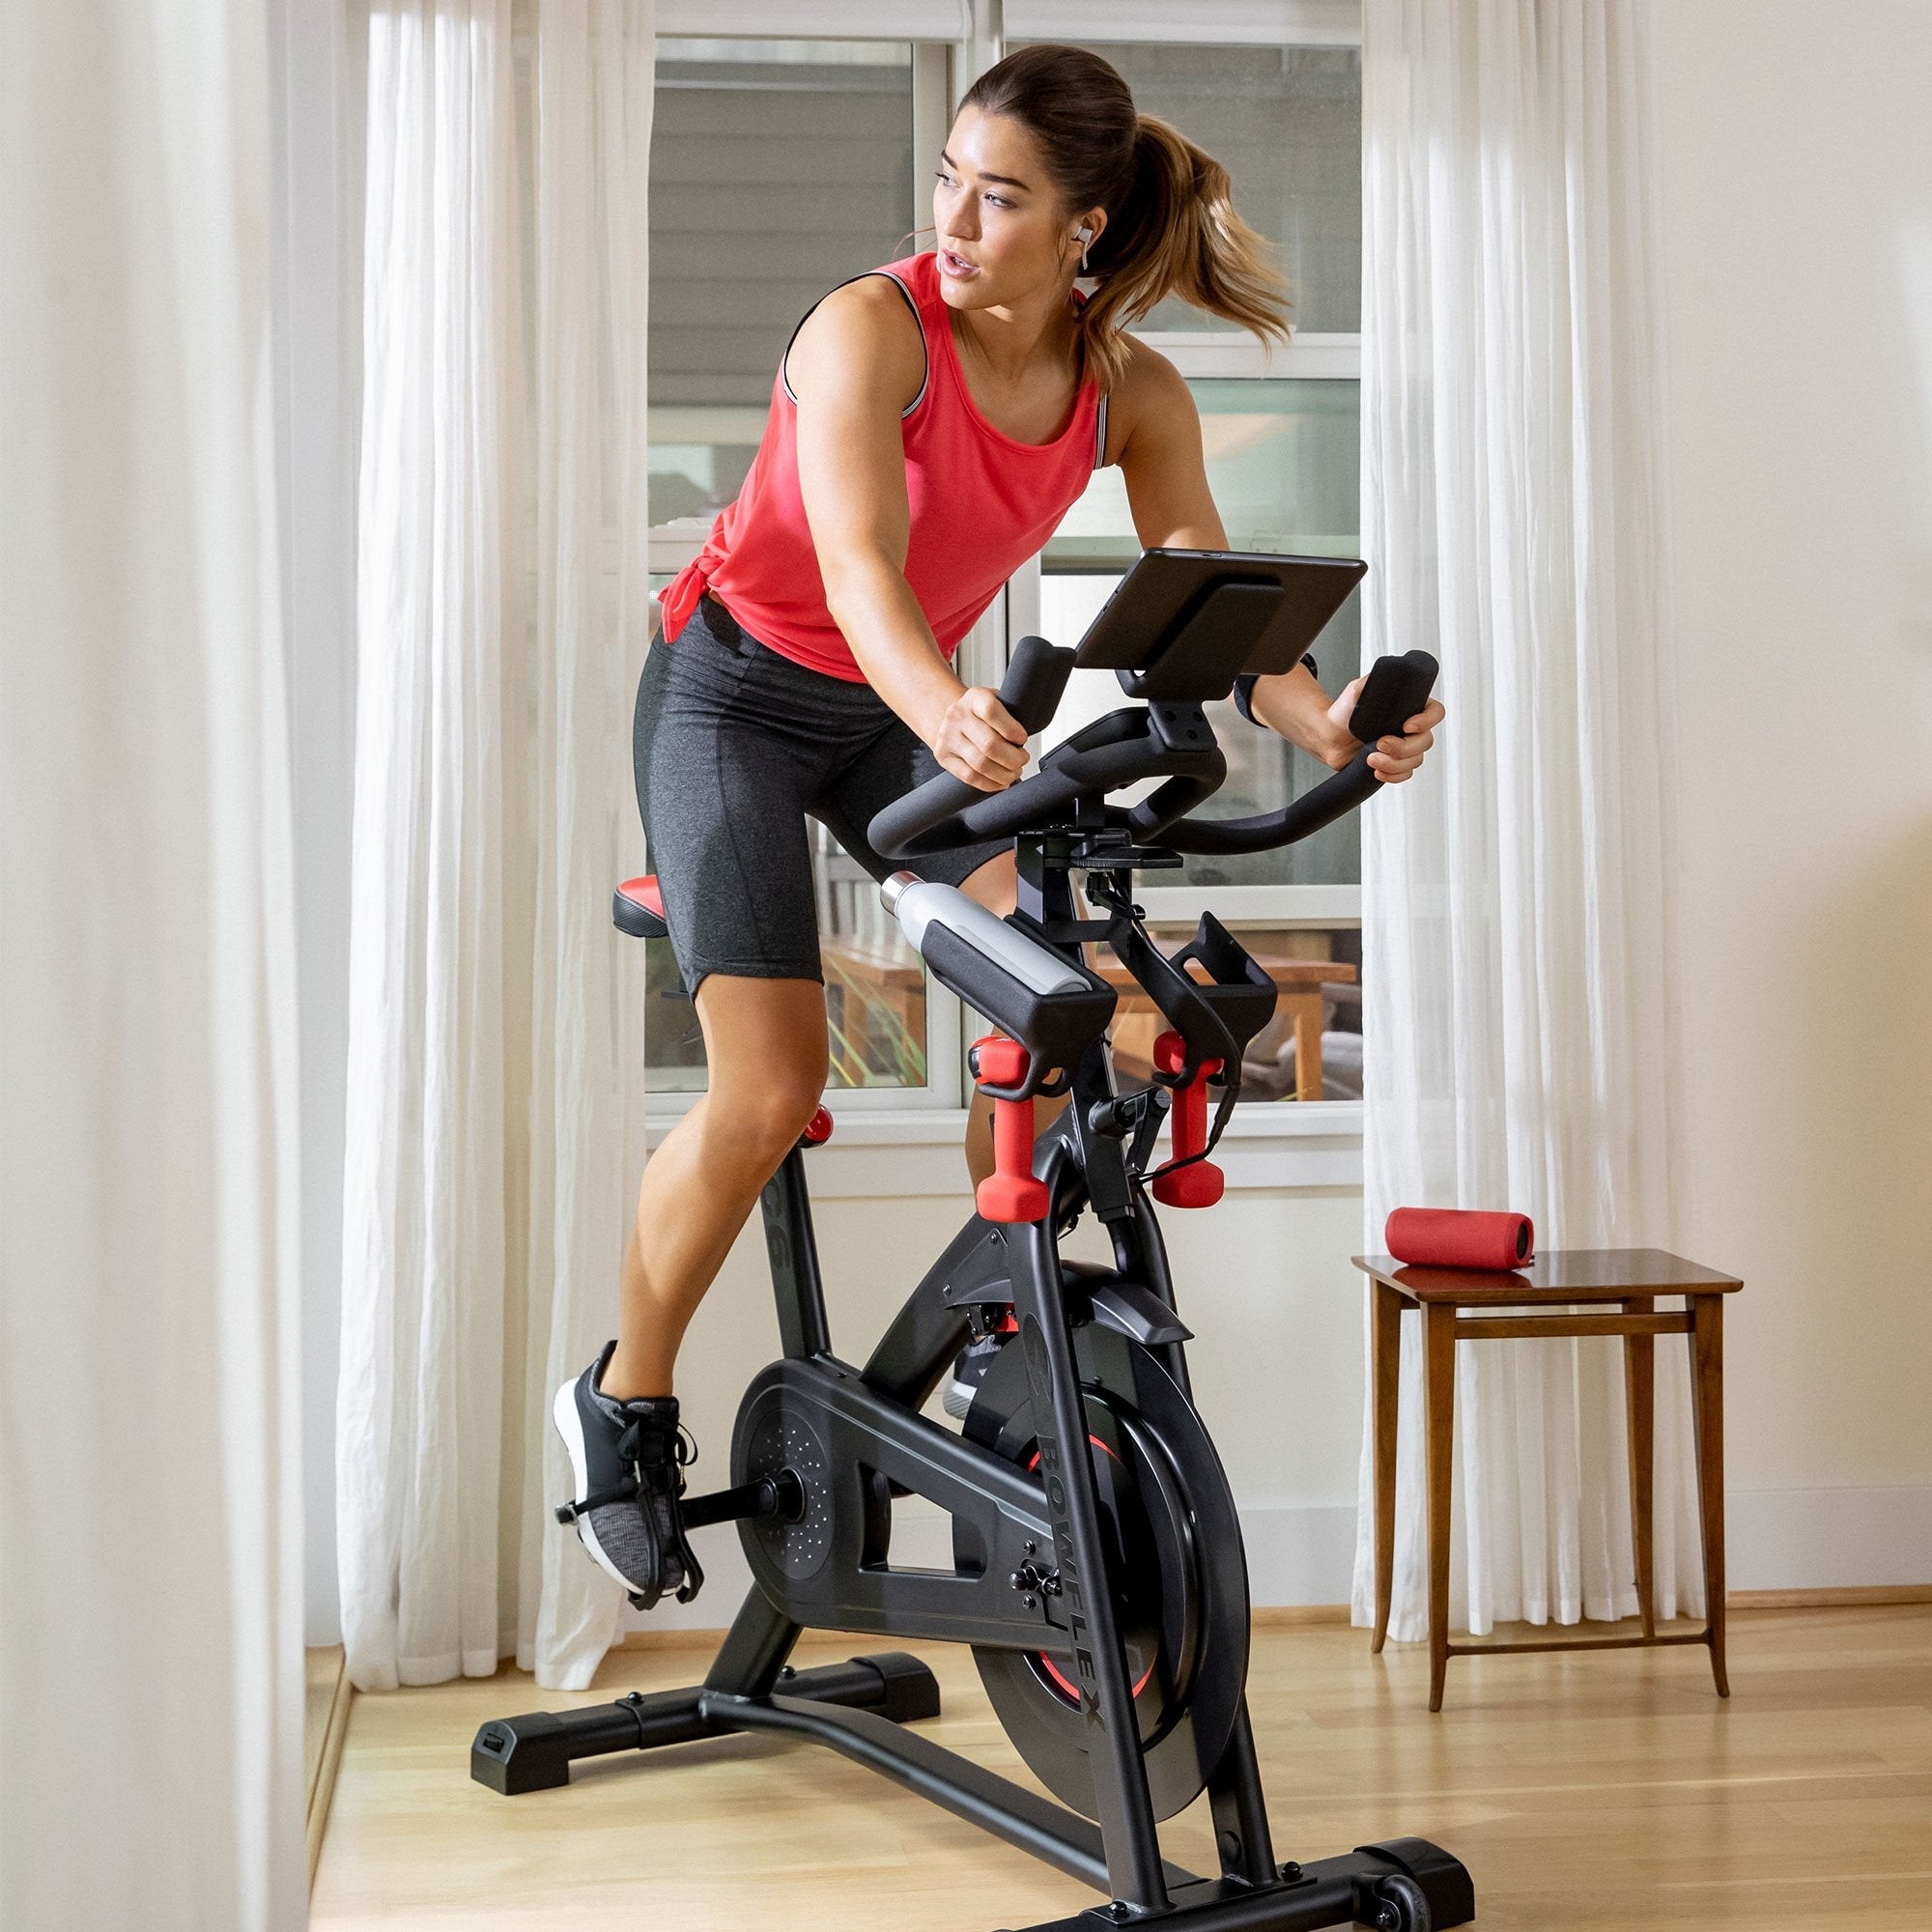 Bowflex C6 Bike with Adjustable Resistance and Interactive Workout Programs